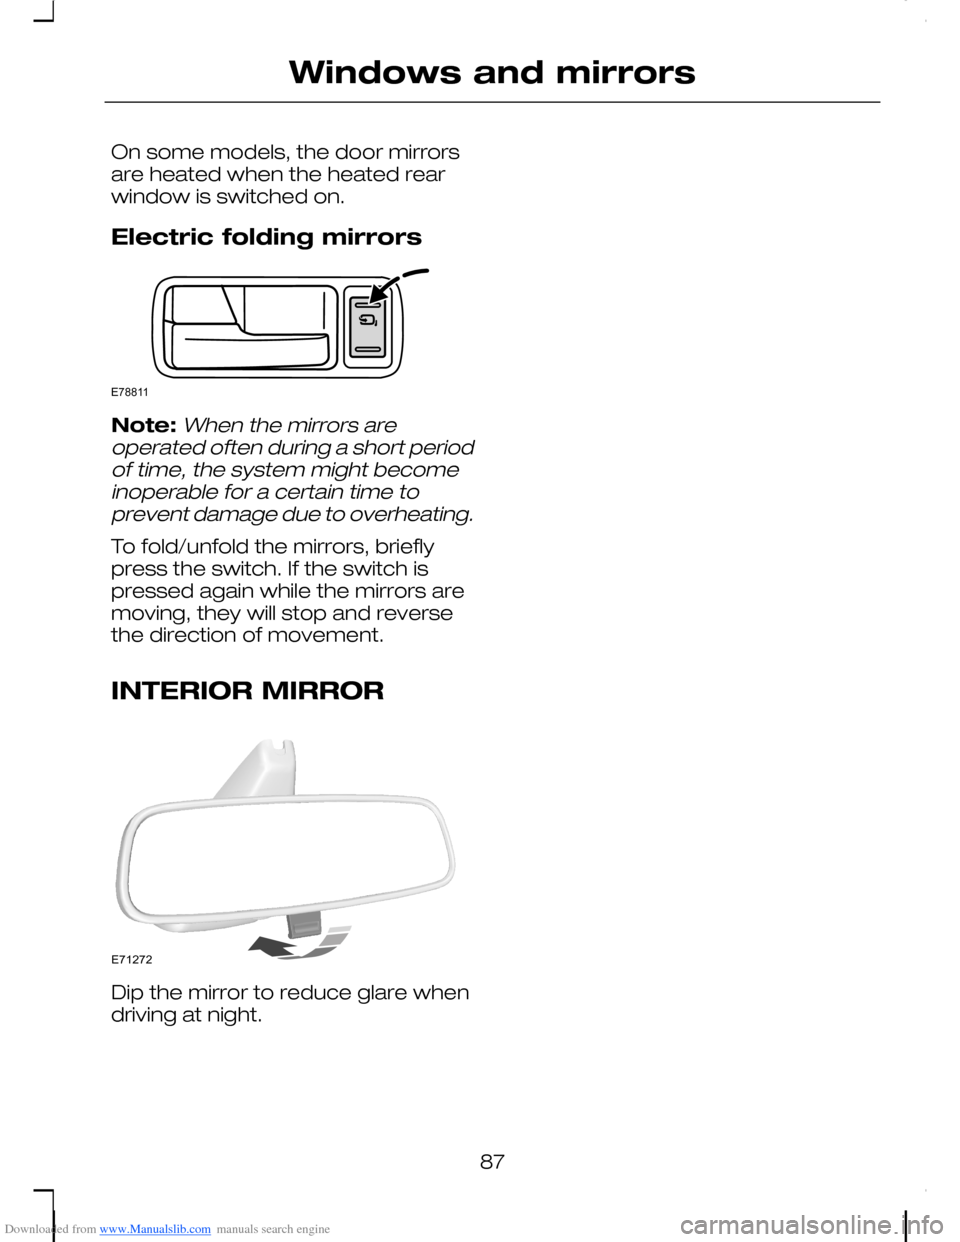 FORD C MAX 2008 1.G Owners Manual Downloaded from www.Manualslib.com manuals search engine On some models, the door mirrorsare heated when the heated rearwindow is switched on.
Electric folding mirrors
Note:When the mirrors areoperate